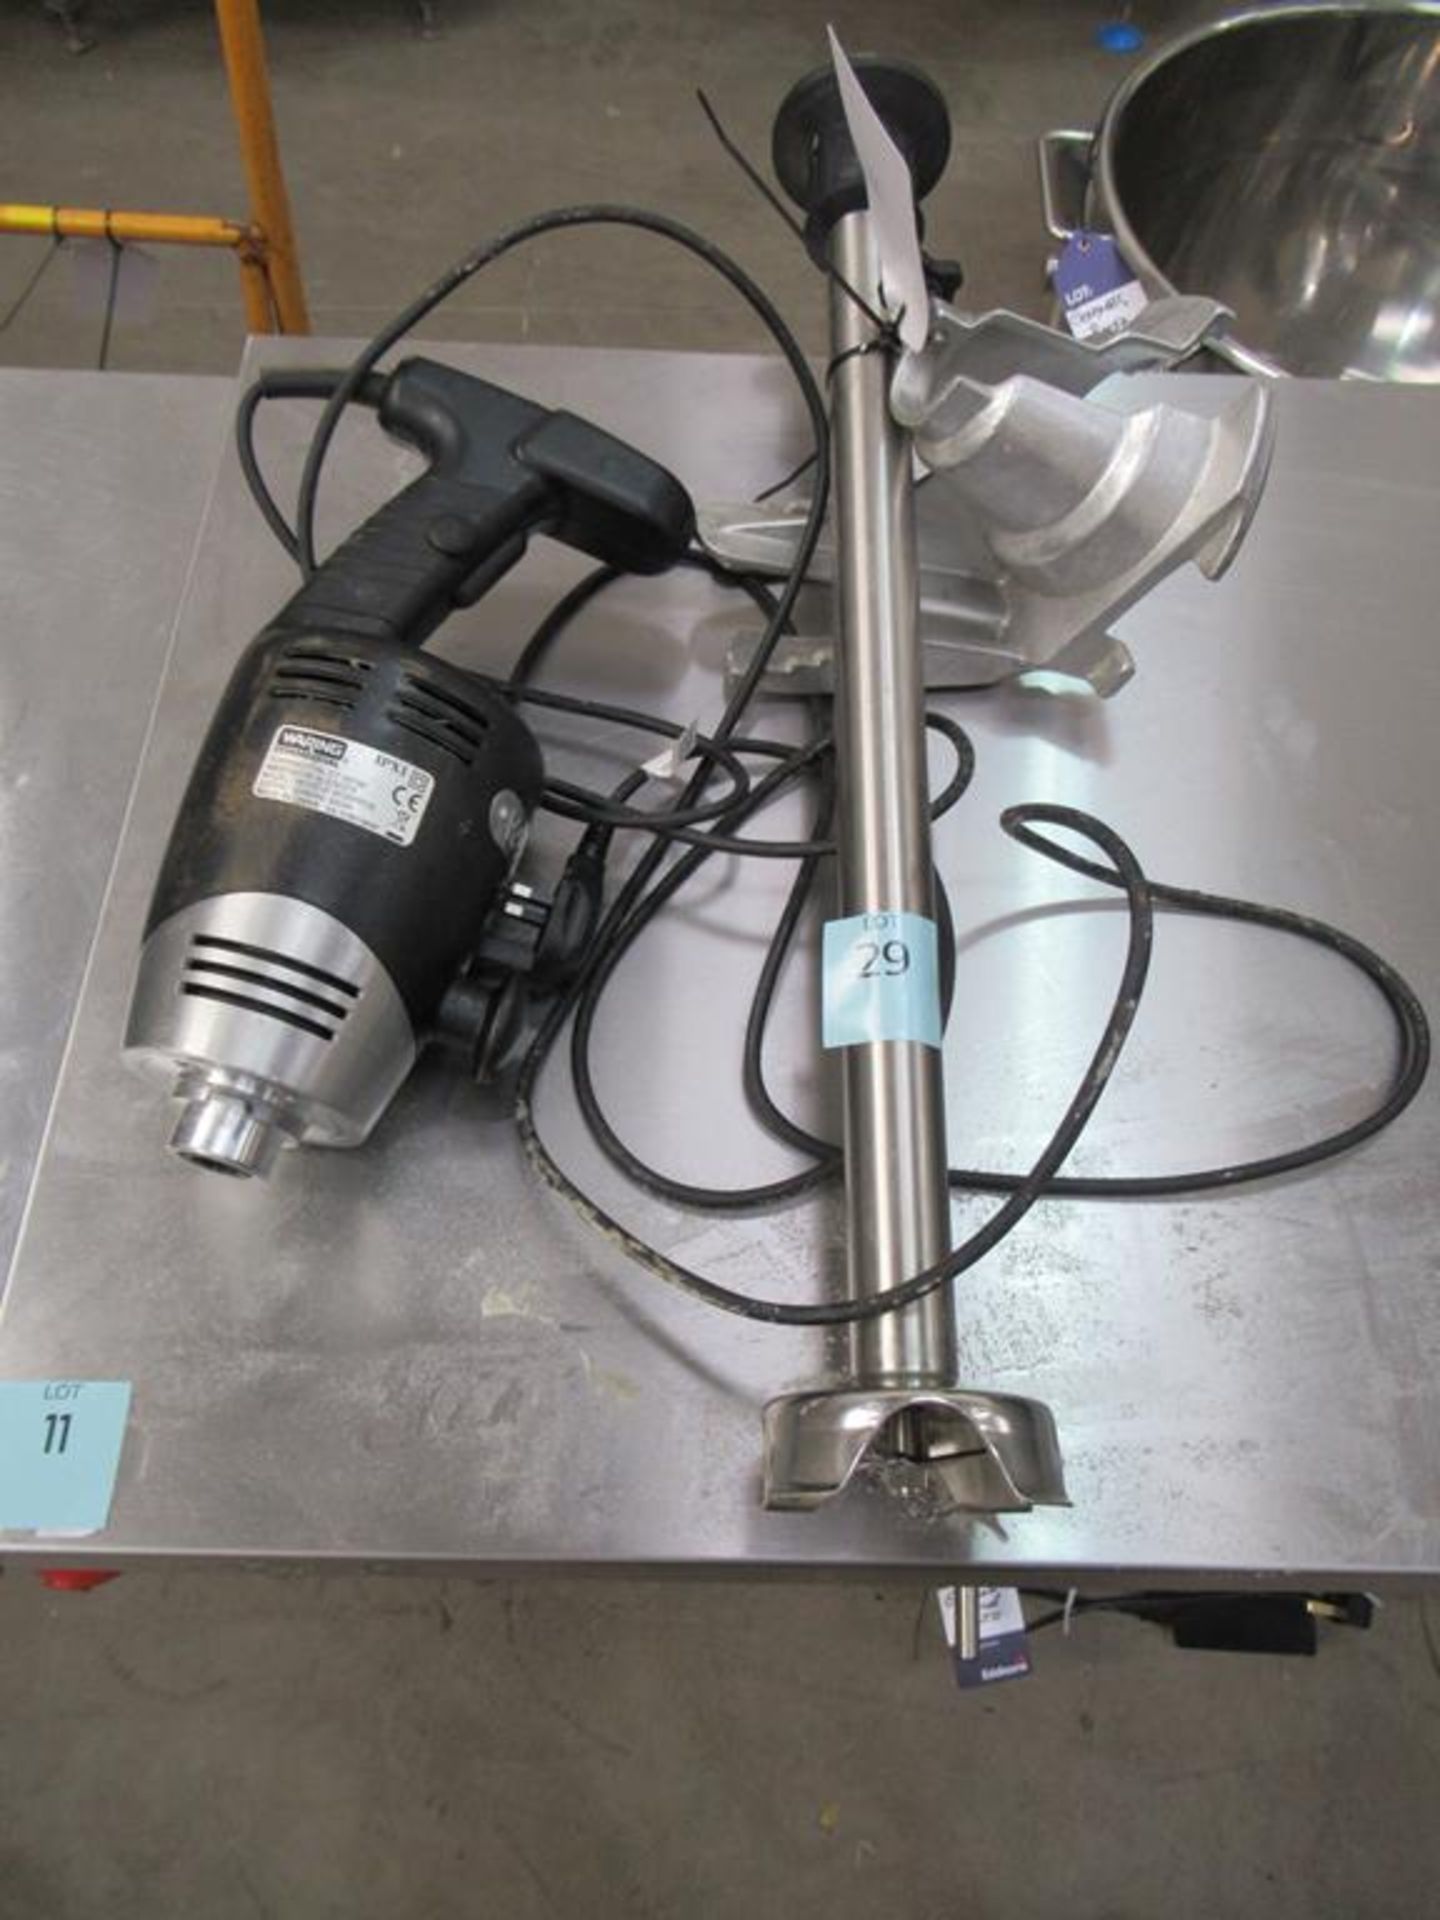 IPXI Waring Commercial Immersion Blender